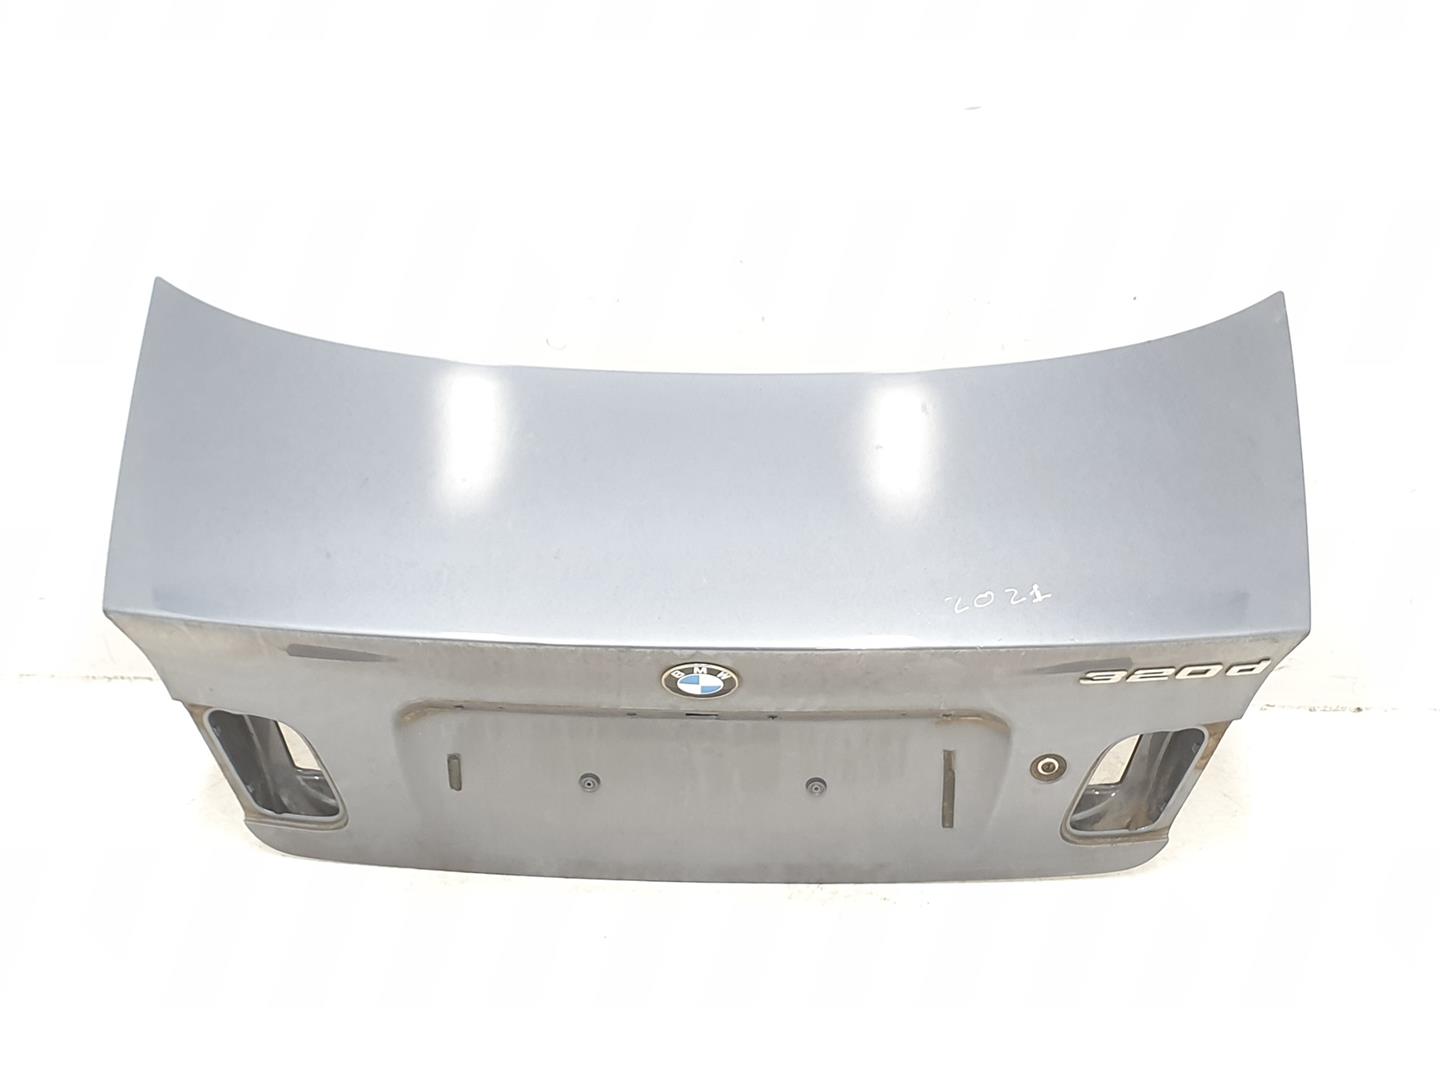 BMW 3 Series E46 (1997-2006) Bootlid Rear Boot 7003314, 41627003314, COLORAZUL372 23750752